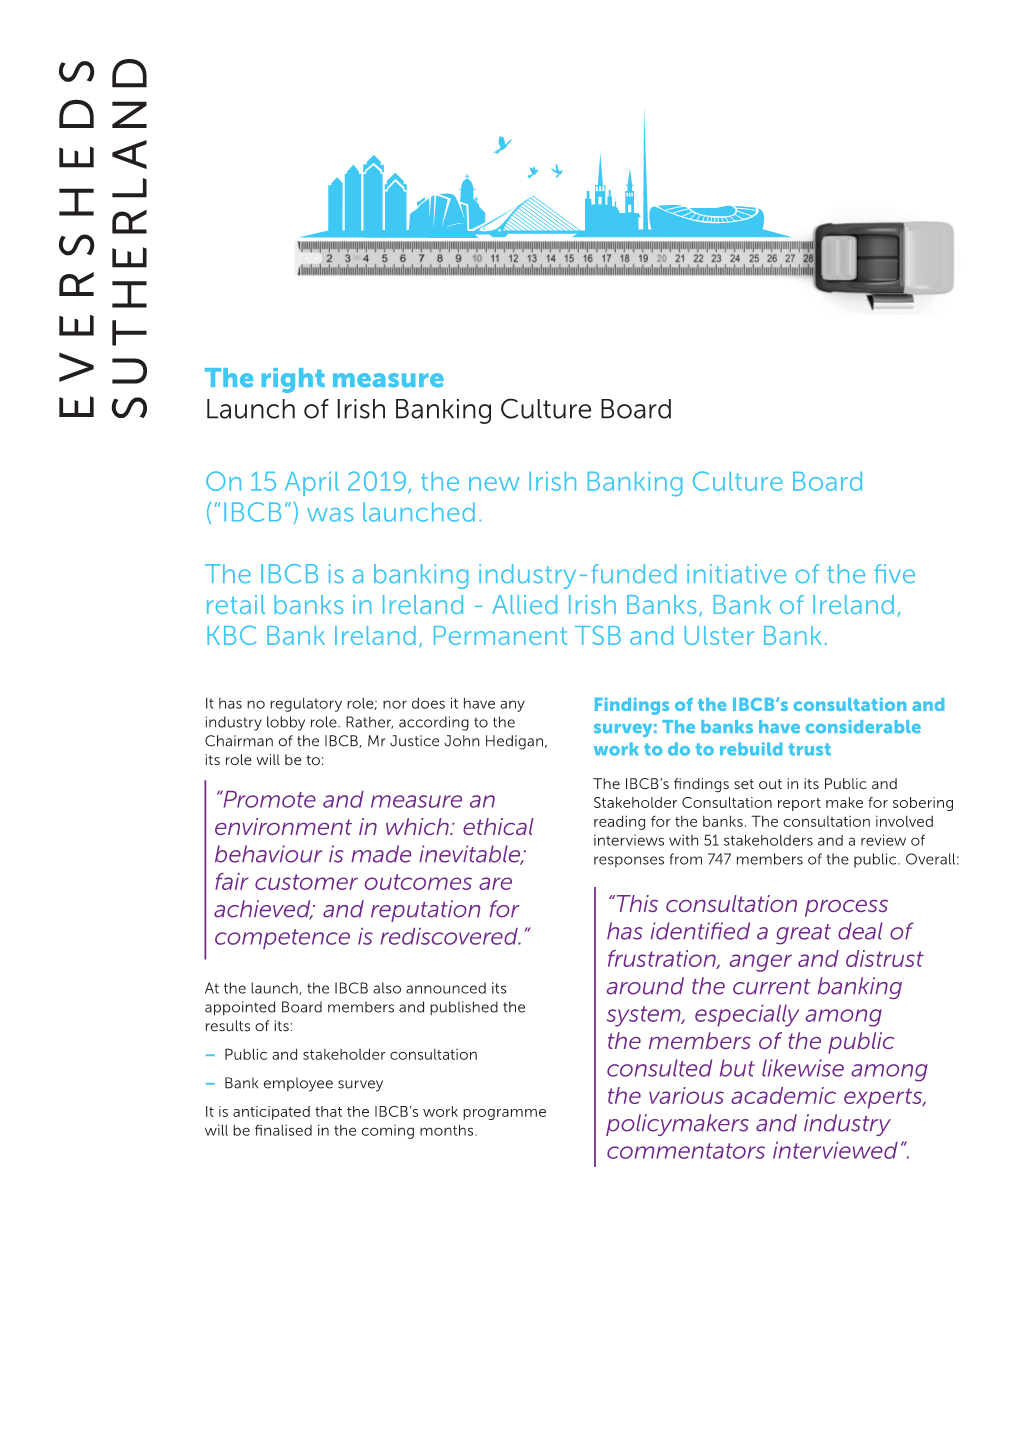 The Right Measure Launch of Irish Banking Culture Board on 15 April